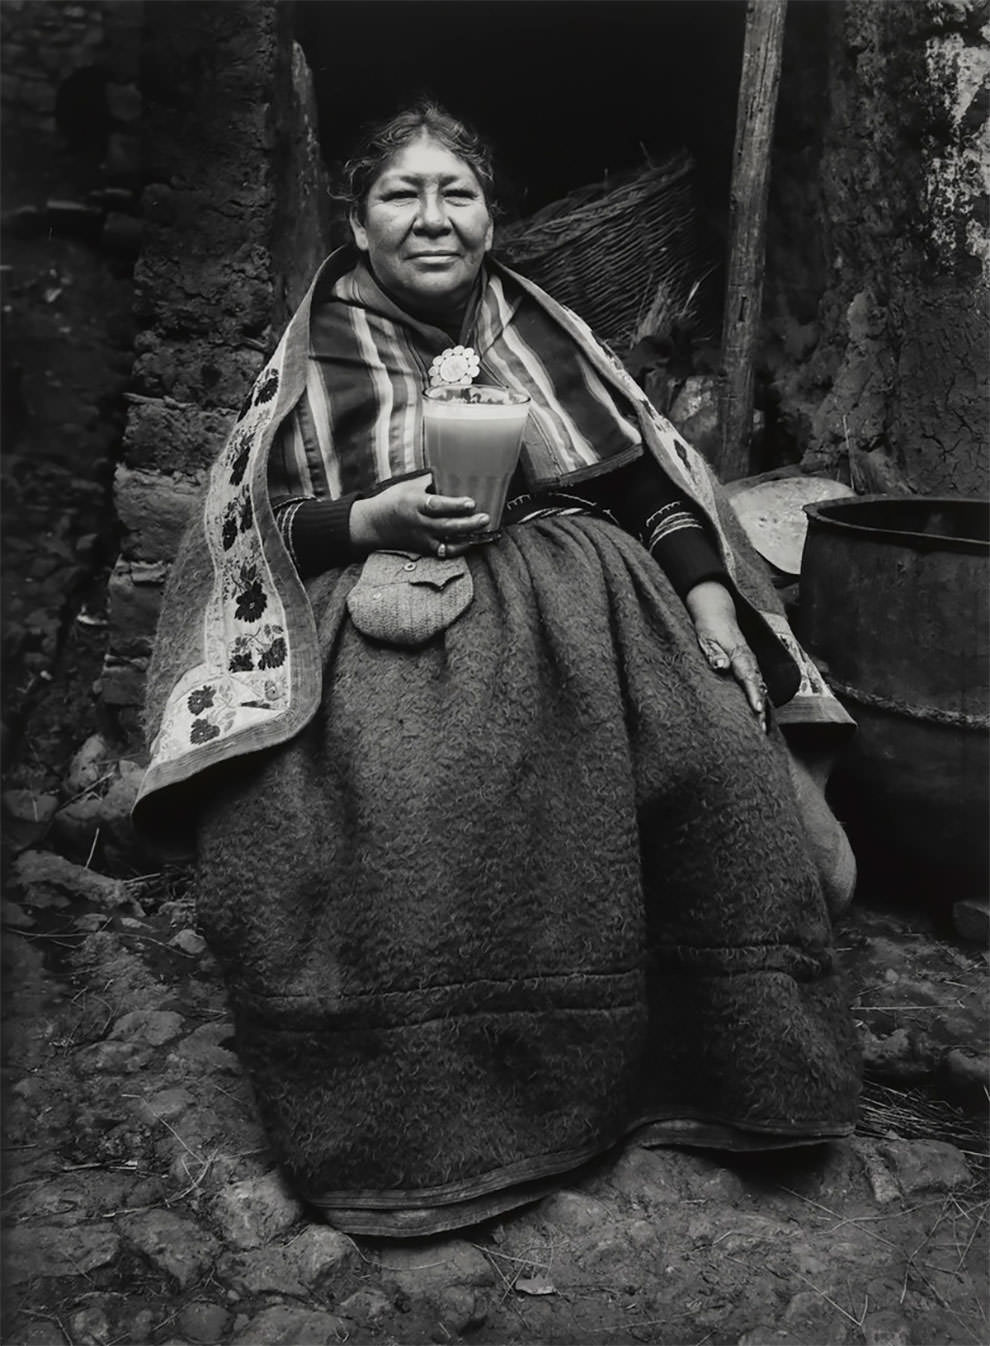 Fascinating Historical Photos Of Inca Culture And Life In Peruvian Andes From The Early 20th Century